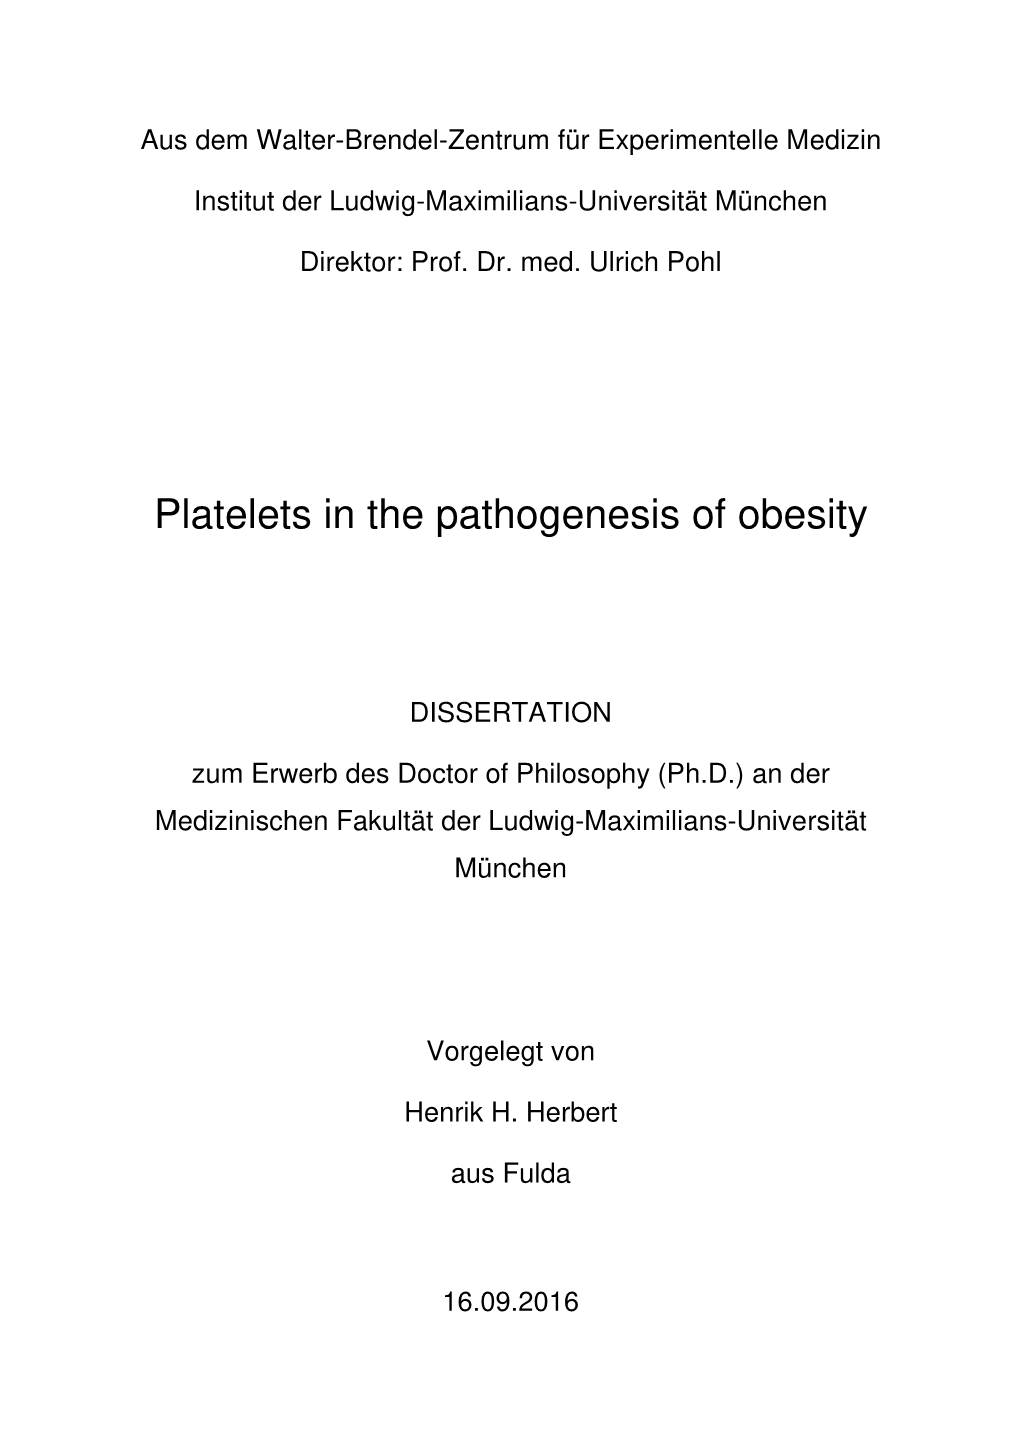 Platelets in the Pathogenesis of Obesity